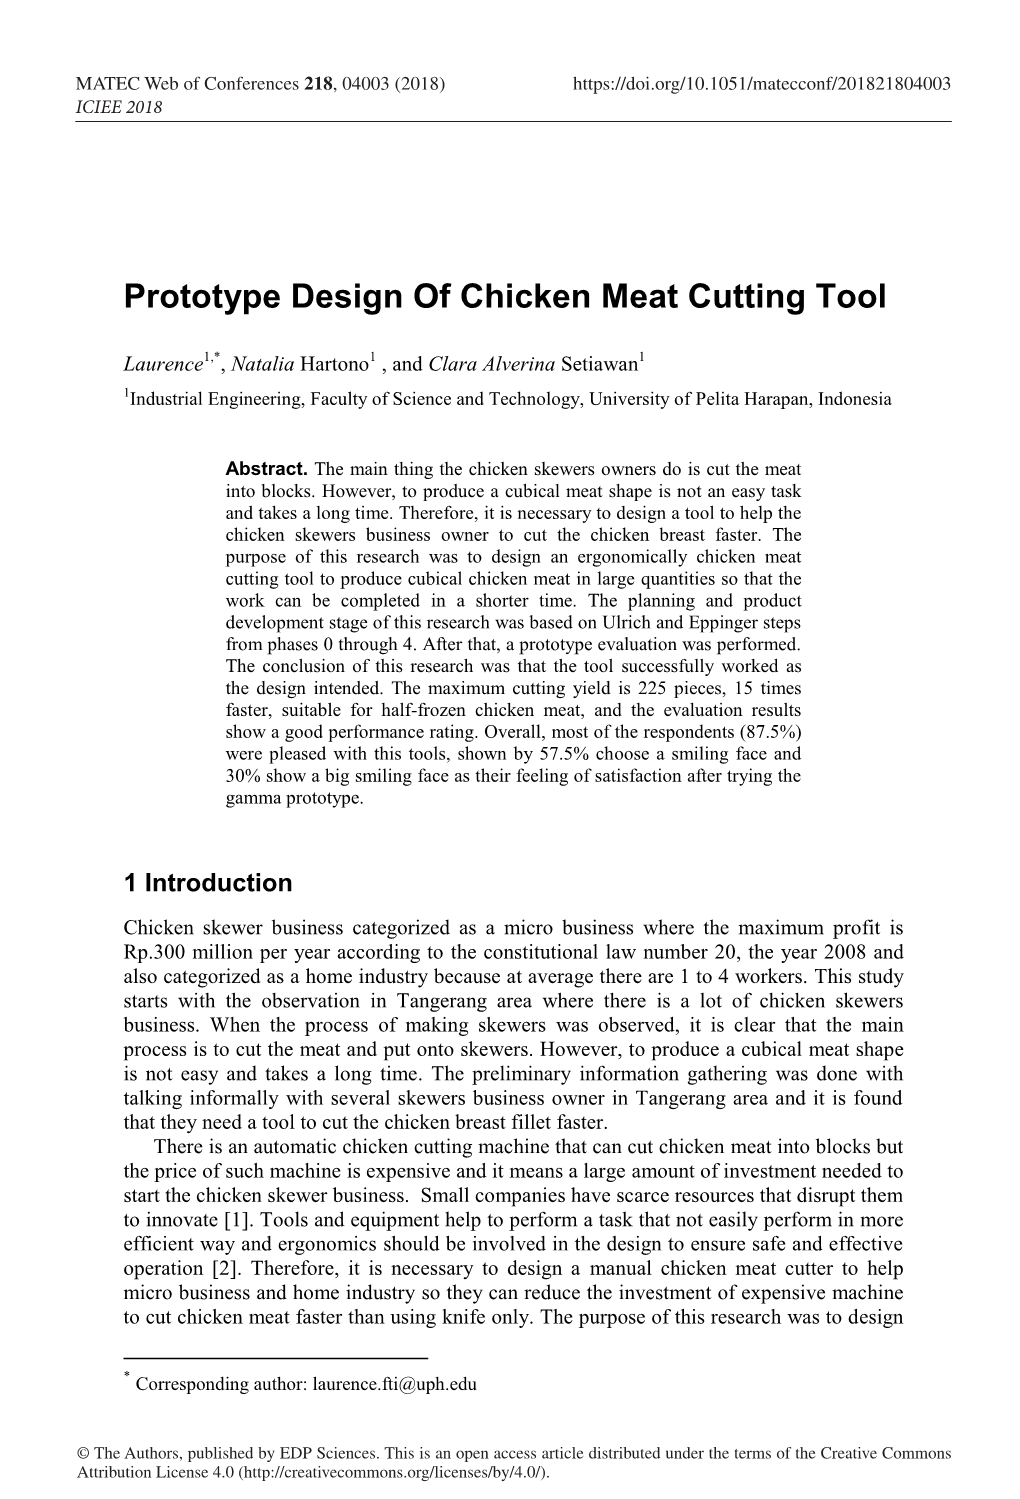 Prototype Design of Chicken Meat Cutting Tool